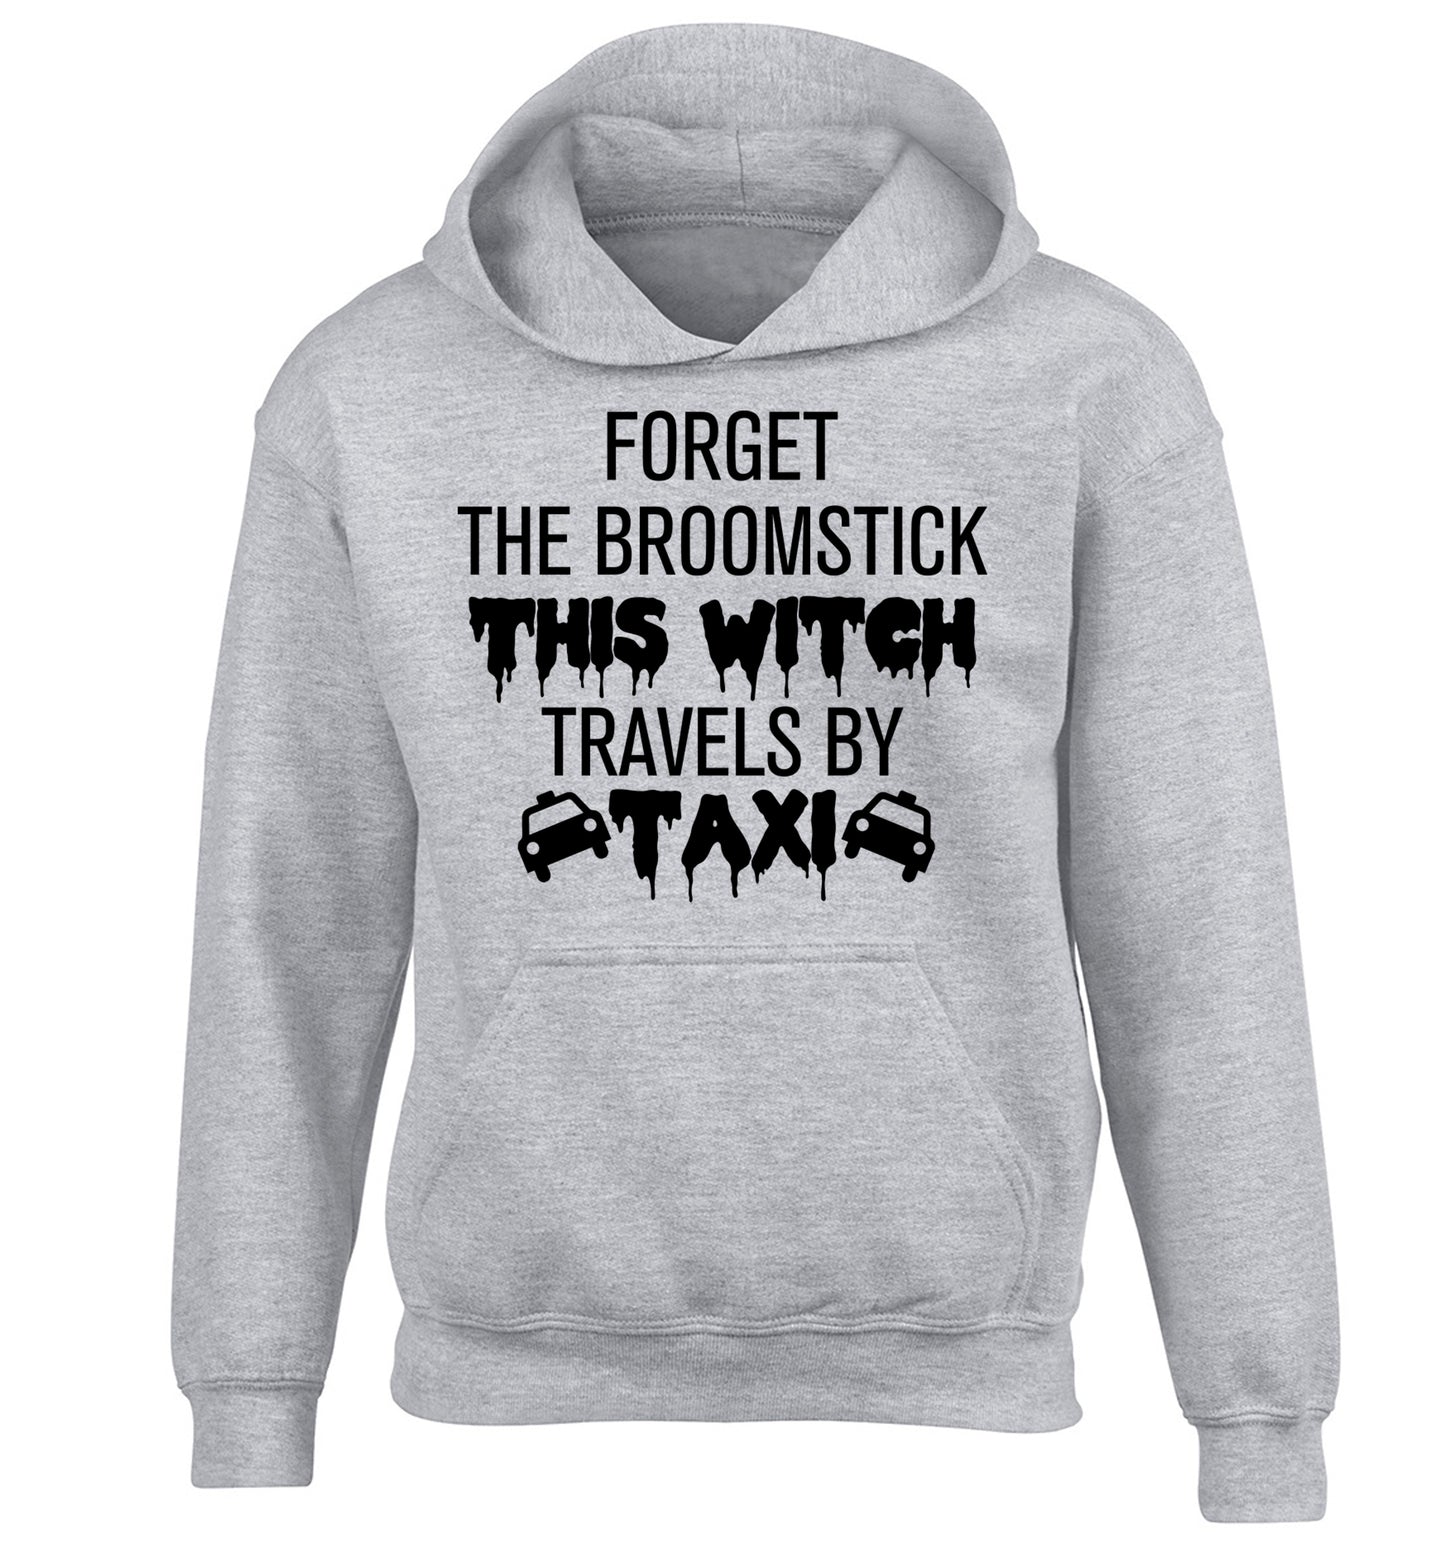 Forget the broomstick this witch travels by taxi children's grey hoodie 12-14 Years